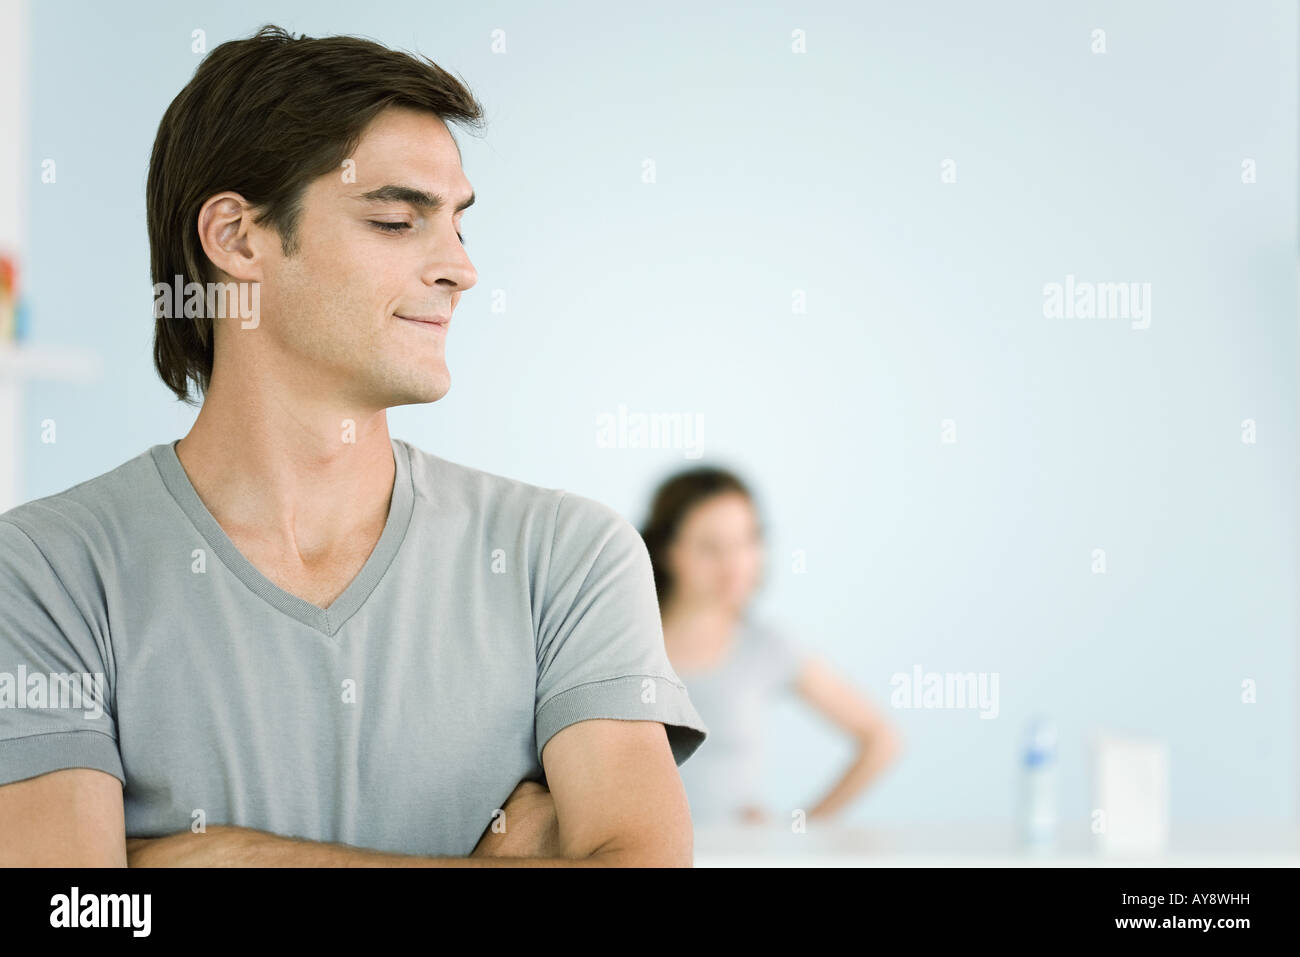 Man with arms folded, looking away, woman standing in background Stock Photo